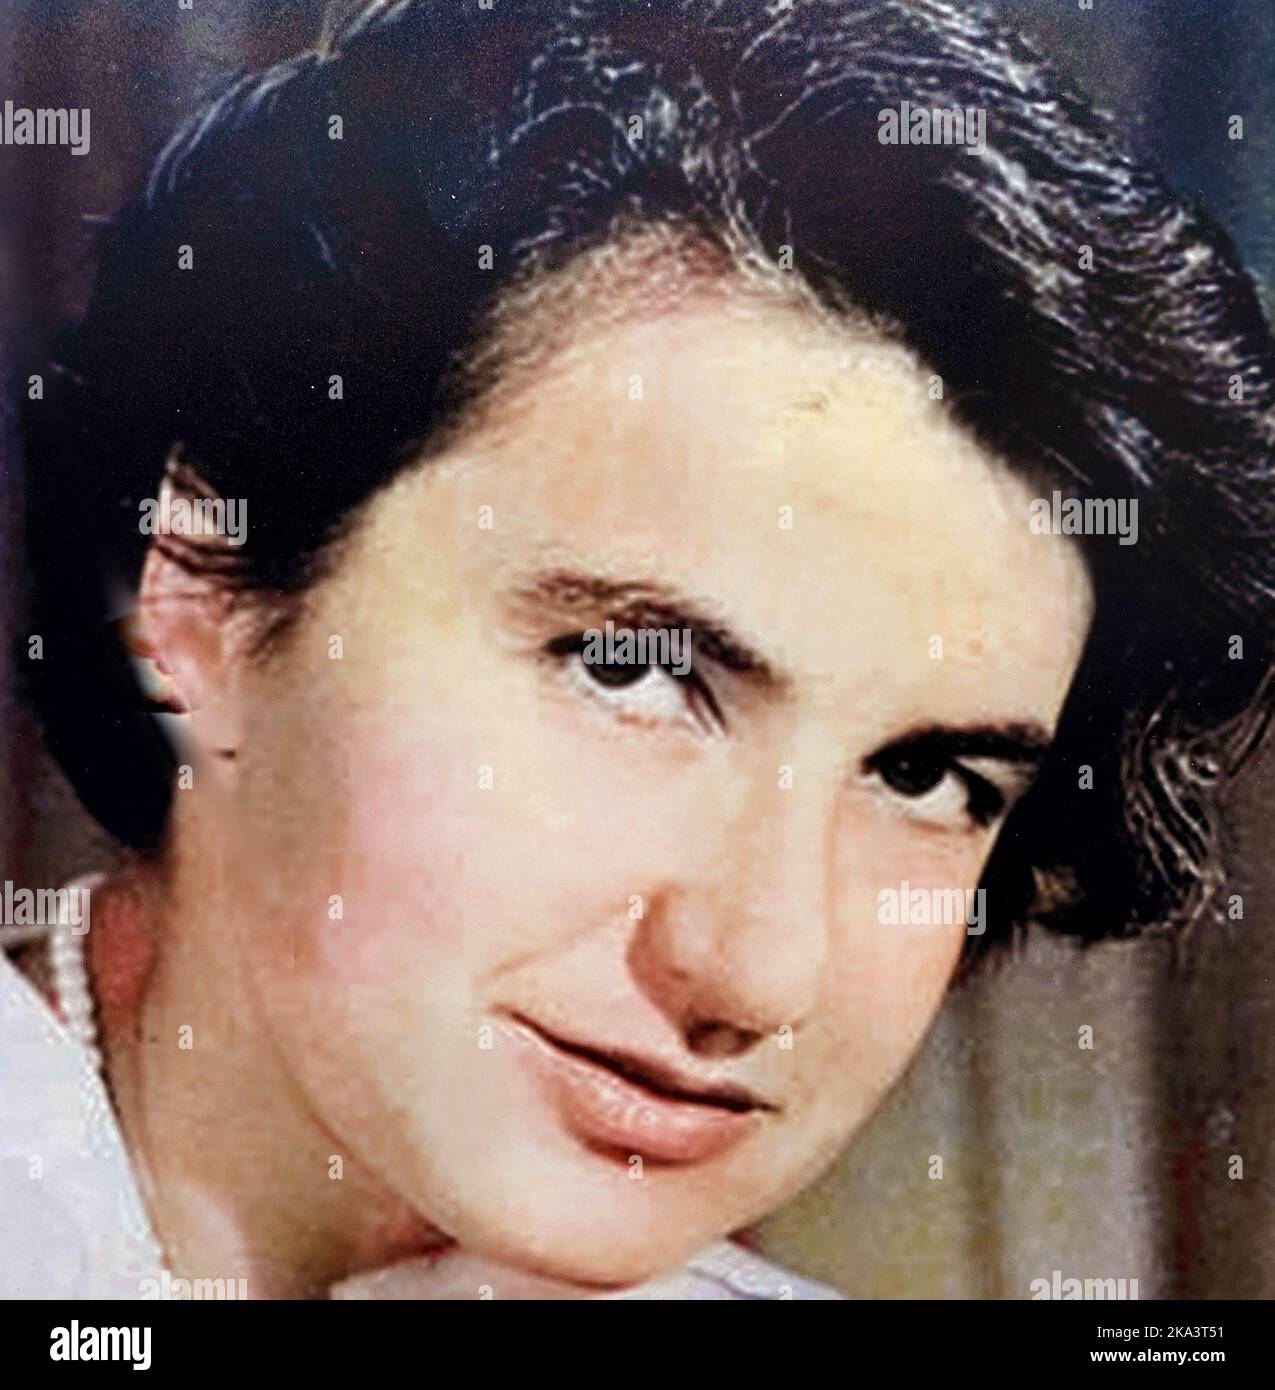 ROSALIND FRANKLIN (1920-1958) English chemist and x-ray crystallographer who contributed to understanding DNA Stock Photo